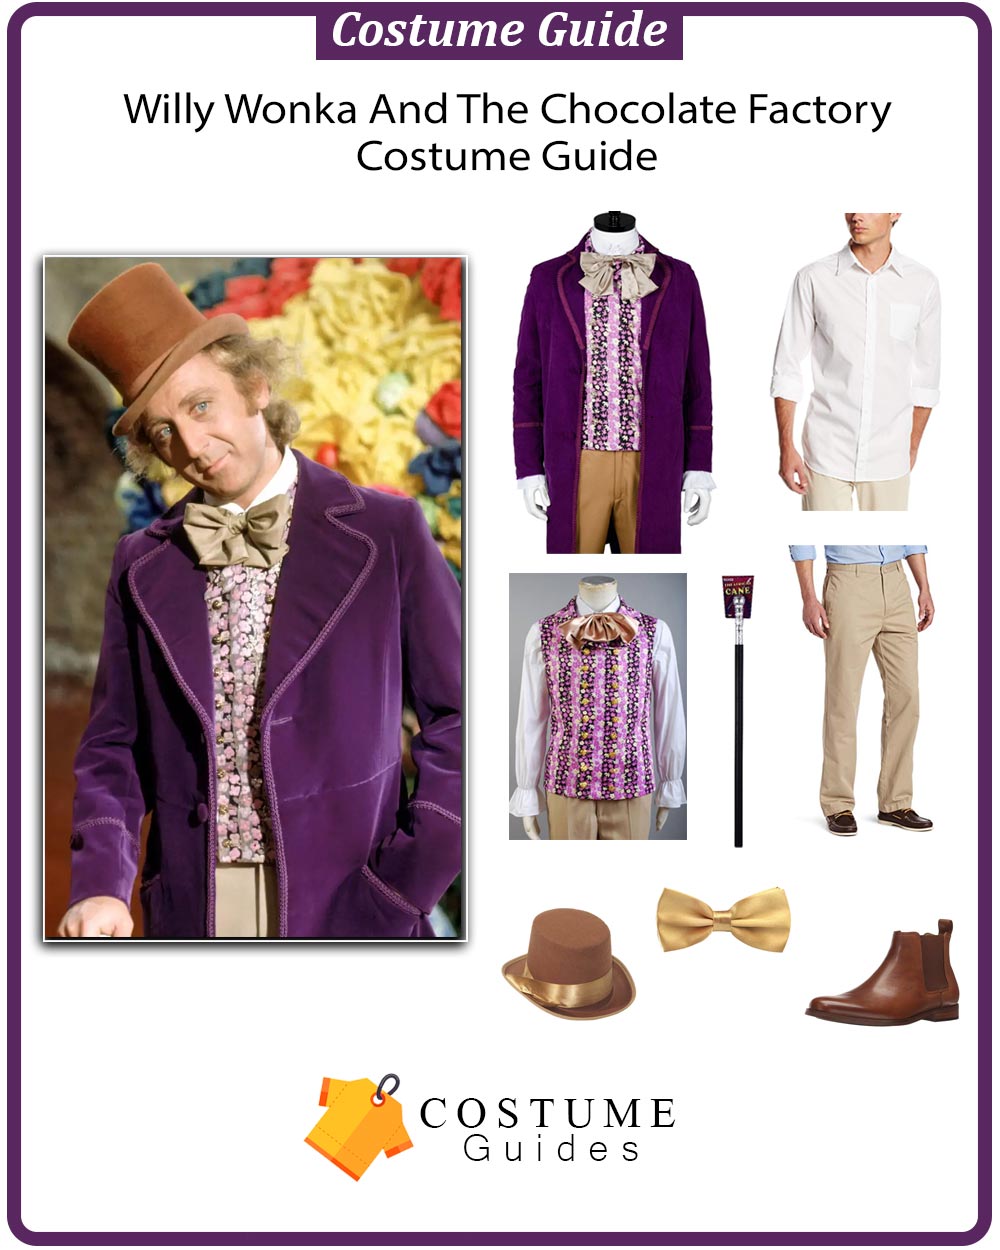 Willy Wonka And The Chocolate Factory Costume Guide